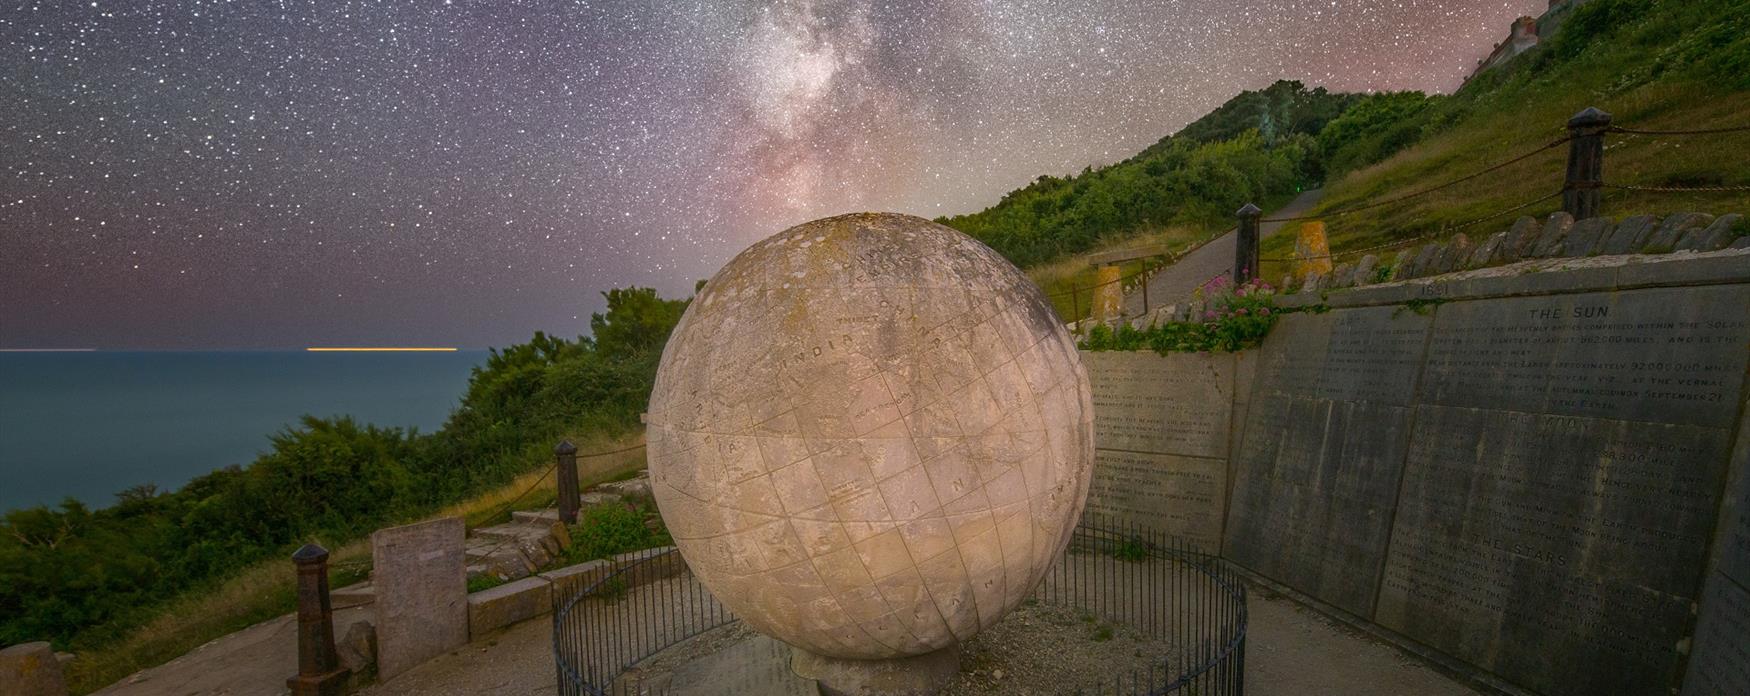 The globe at Durlston Country Park